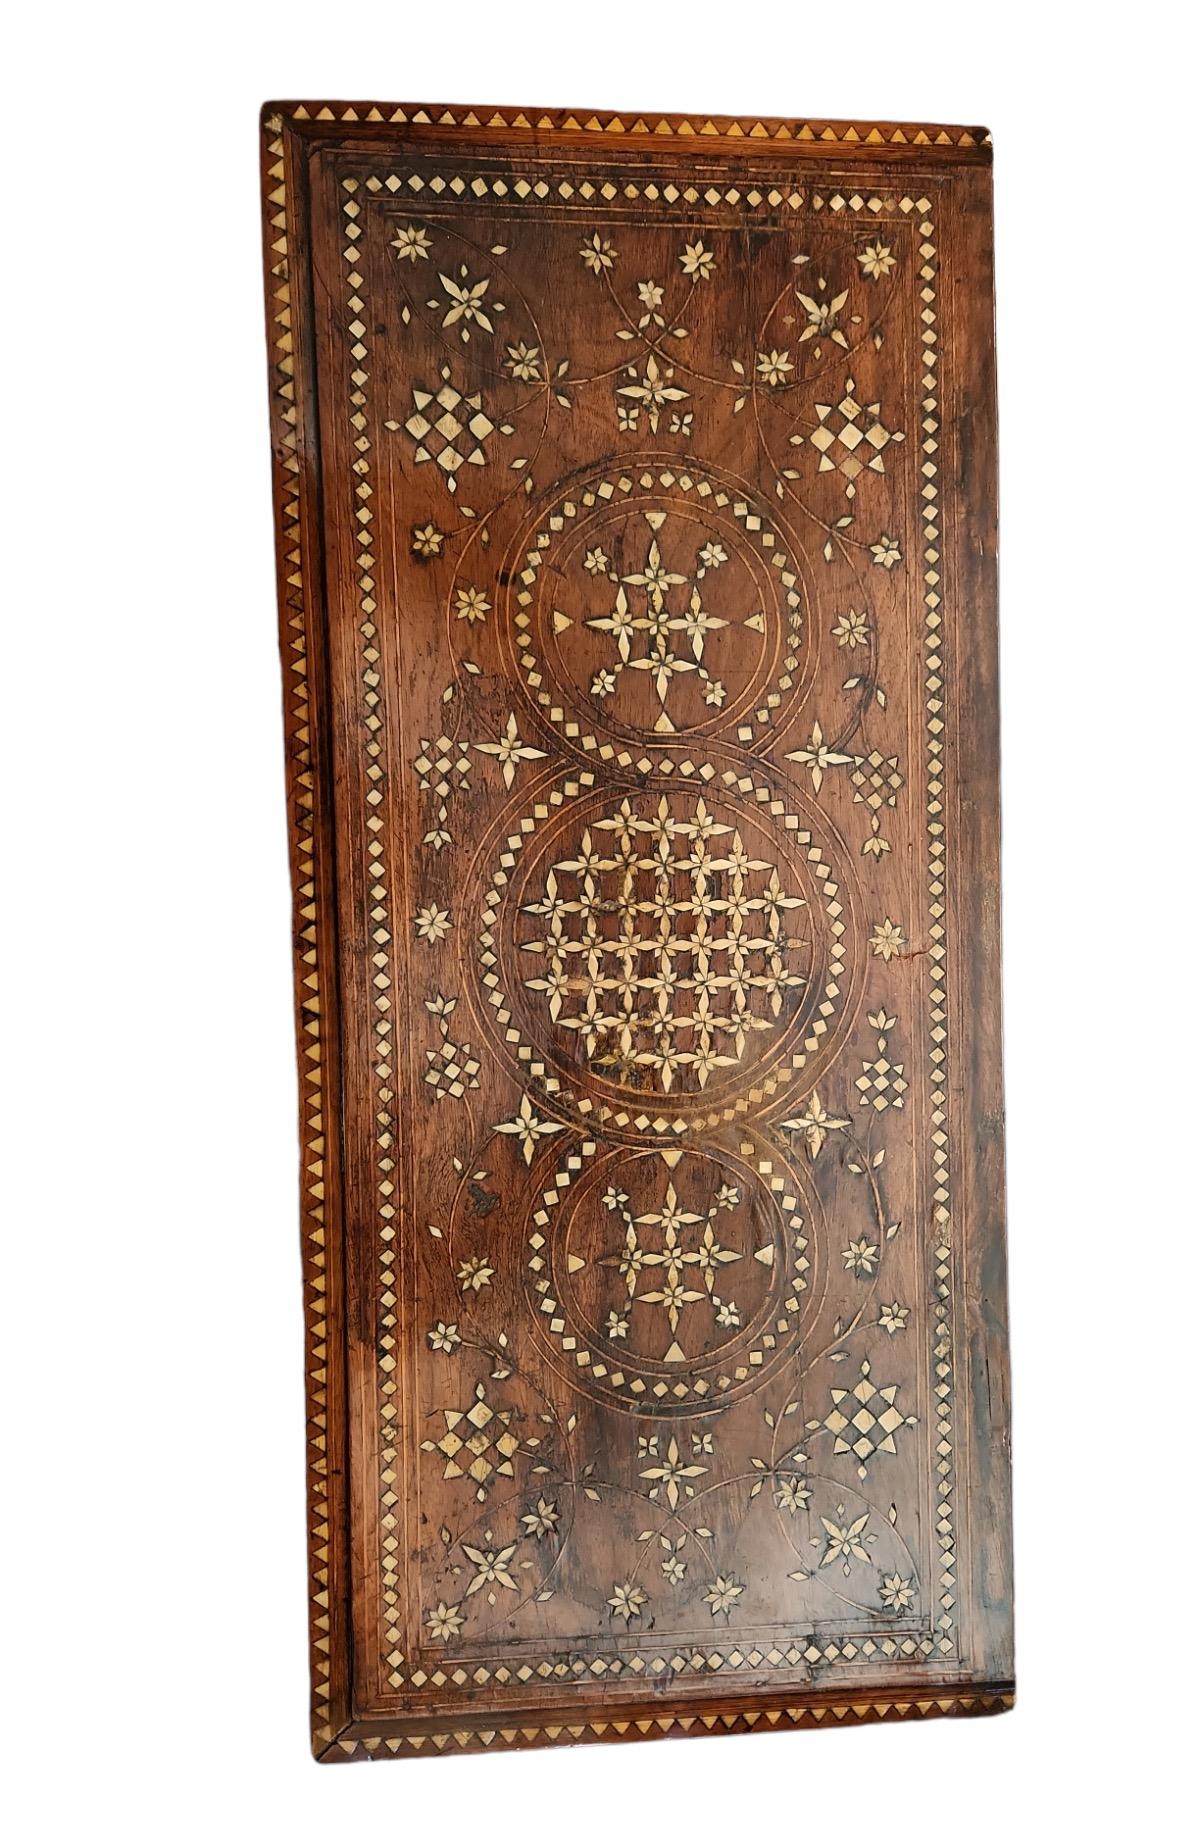 Finely inlaid cabinet. Excellent condition.